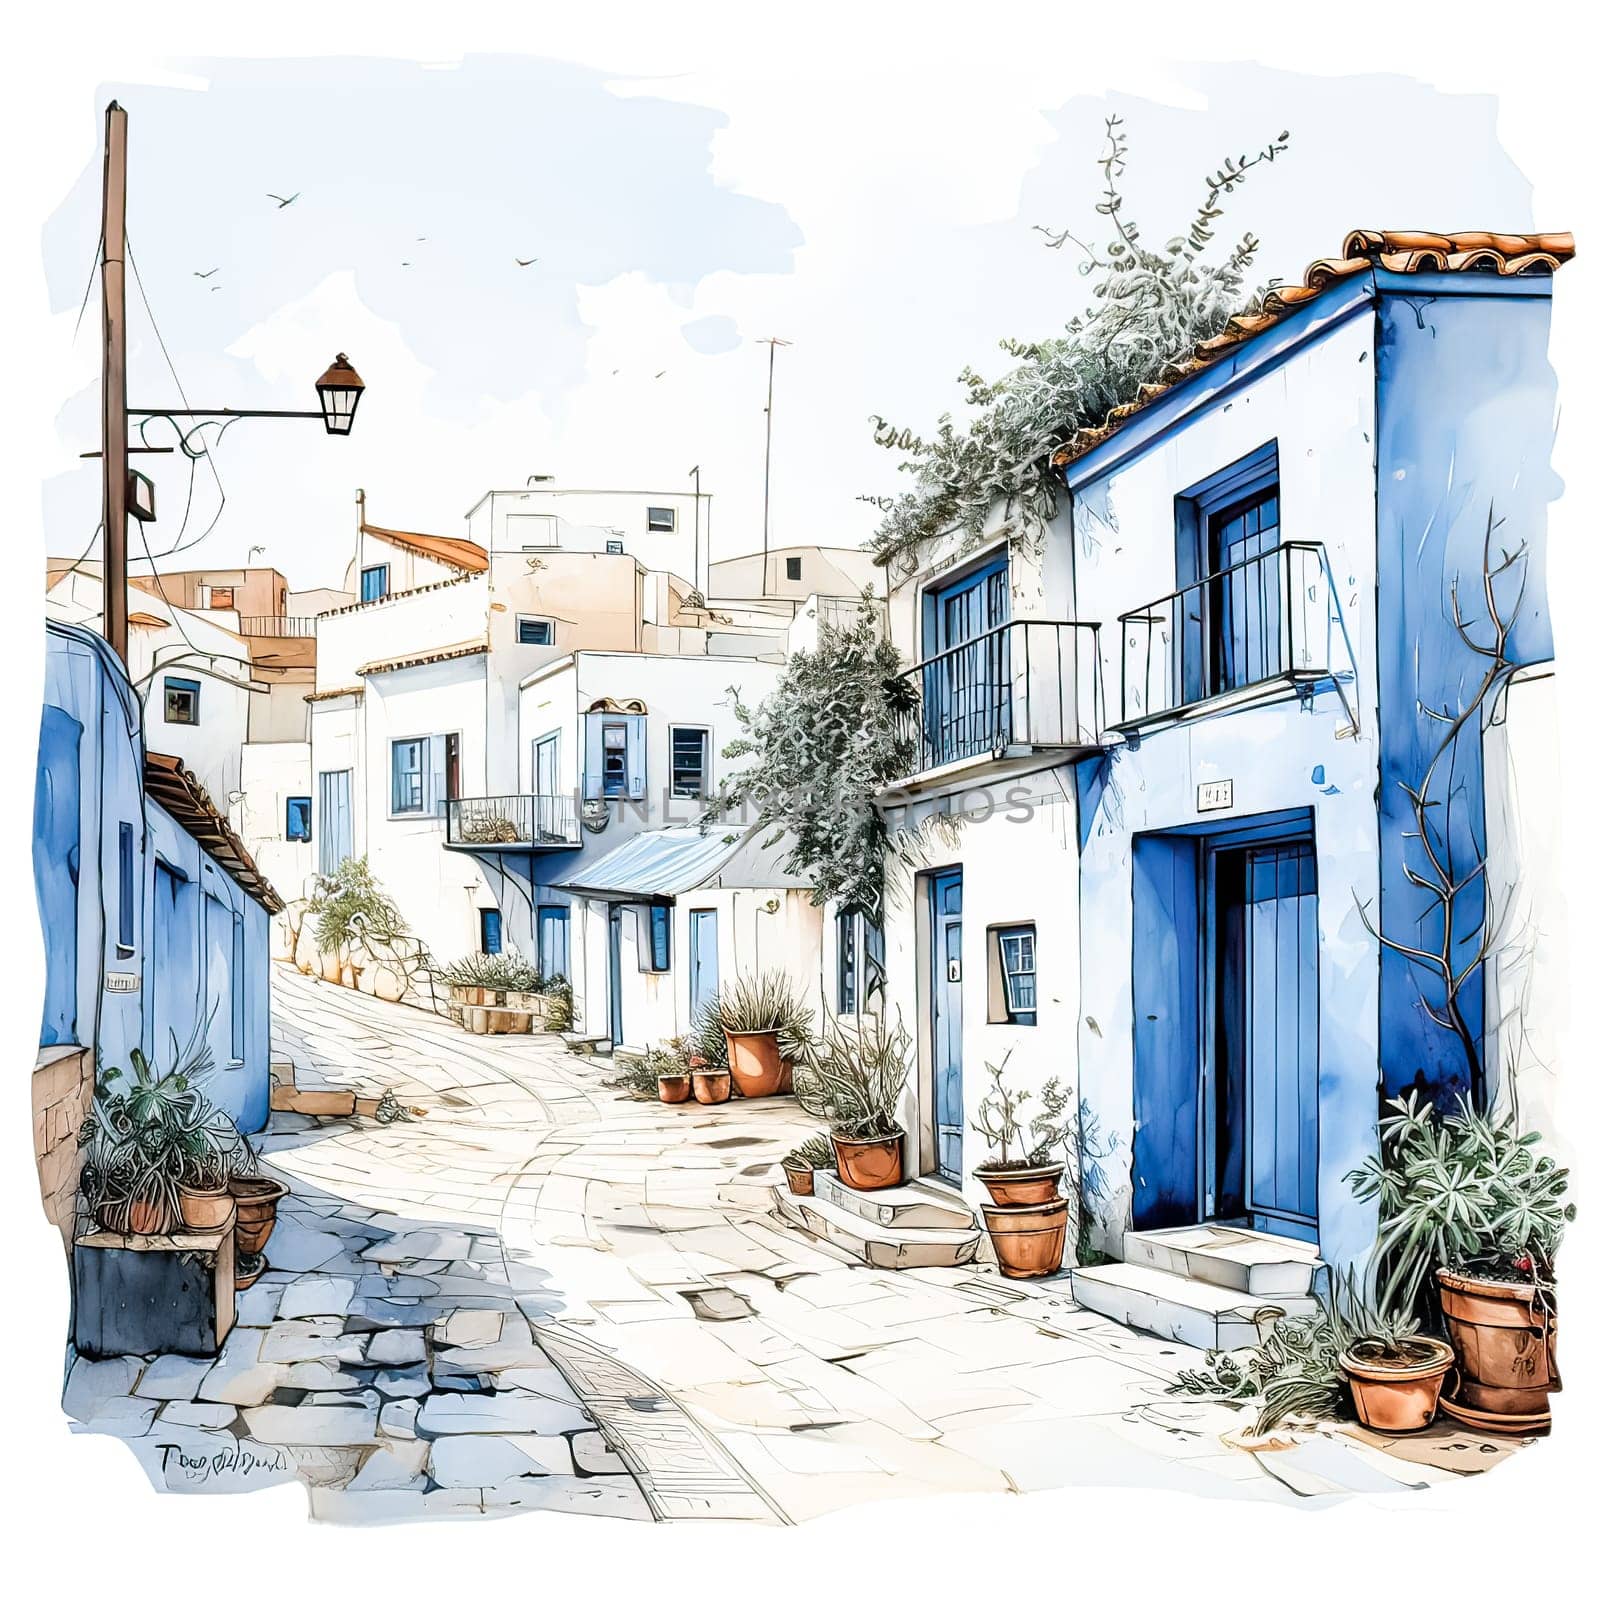 Moroccan Oasis, Watercolor sketch showcases charming Moroccan style houses on lush streets in a scenic landscape